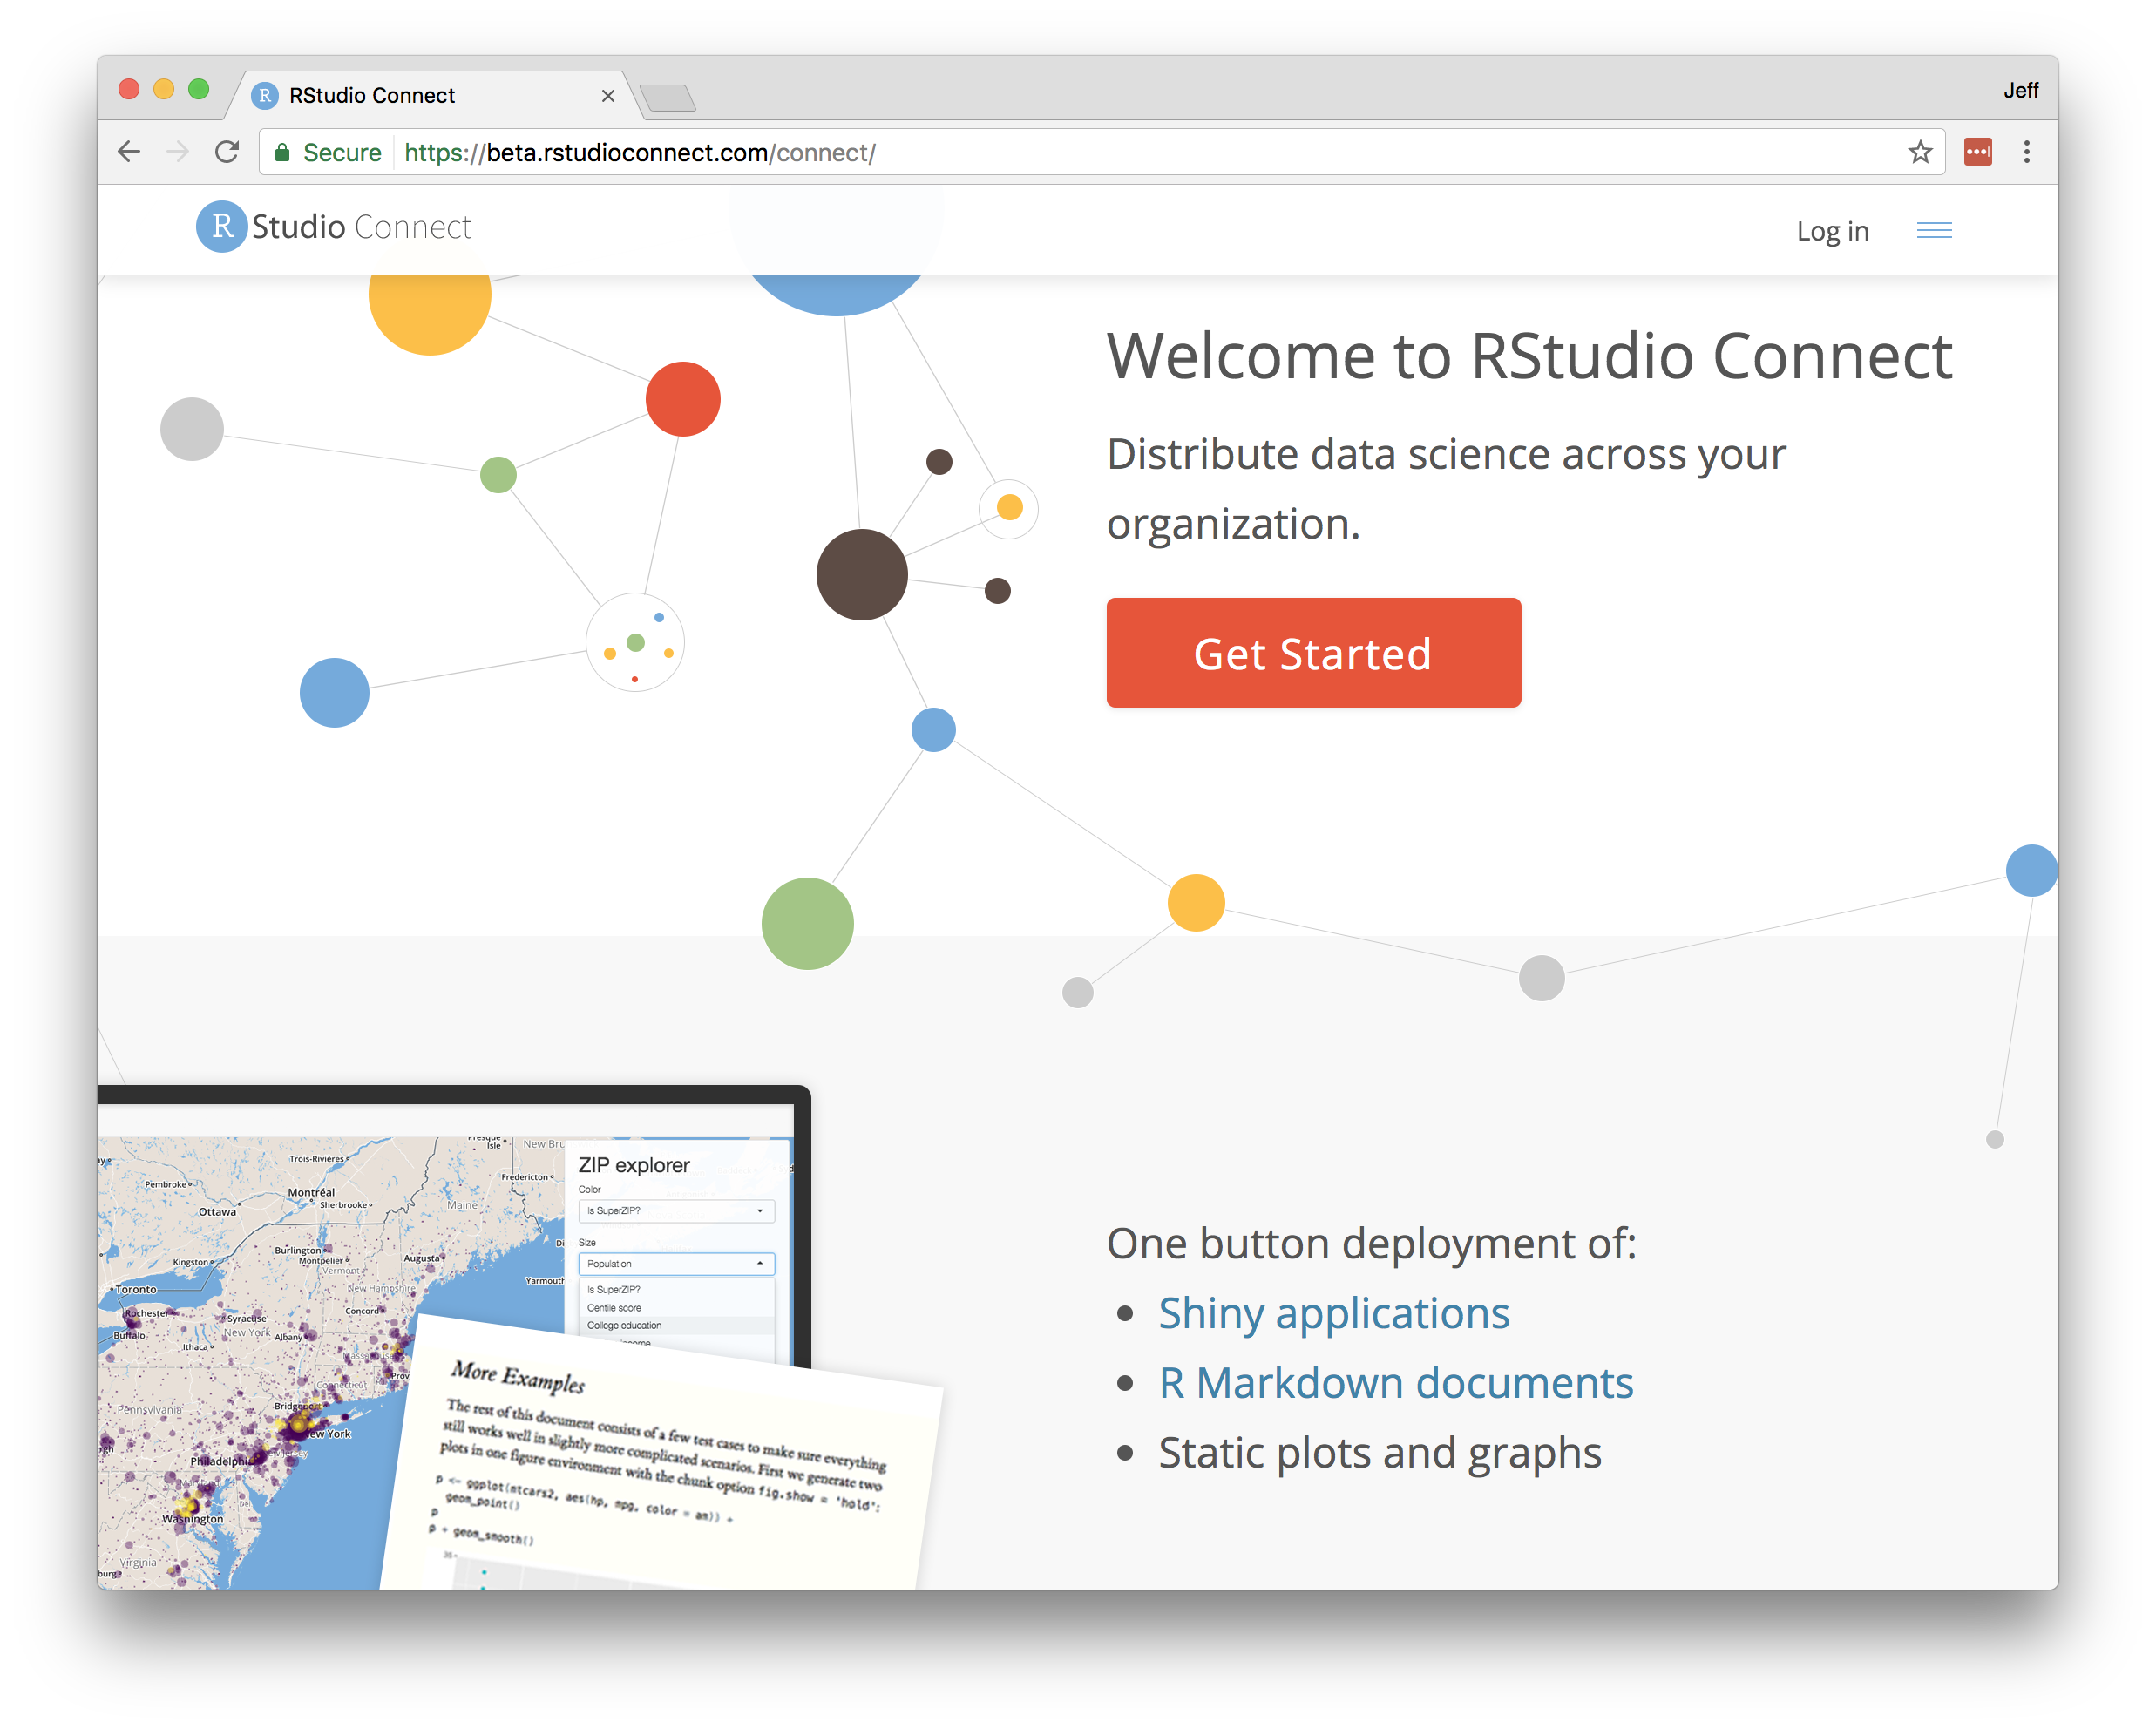 New landing page in RStudio Connect v1.5.0